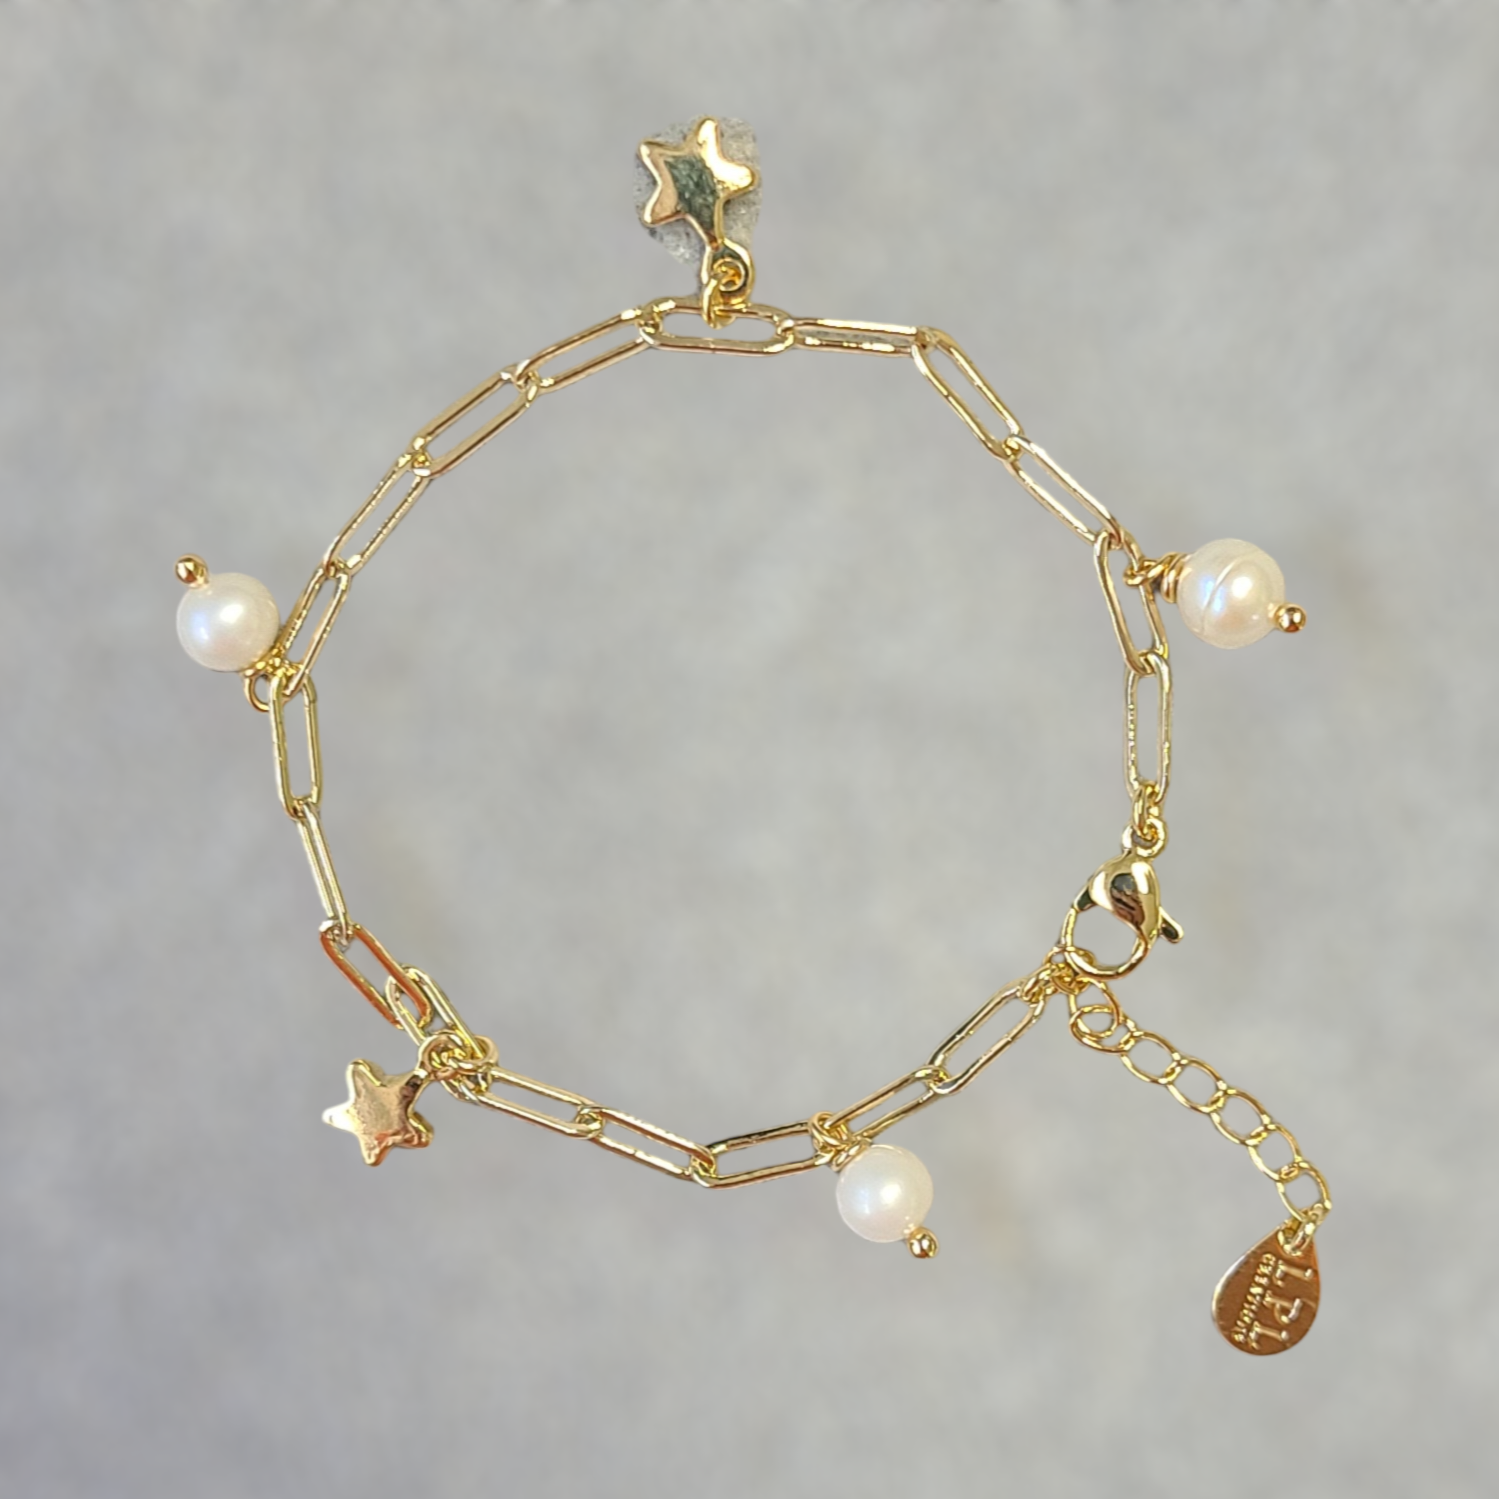 Star and Pearl Bracelet